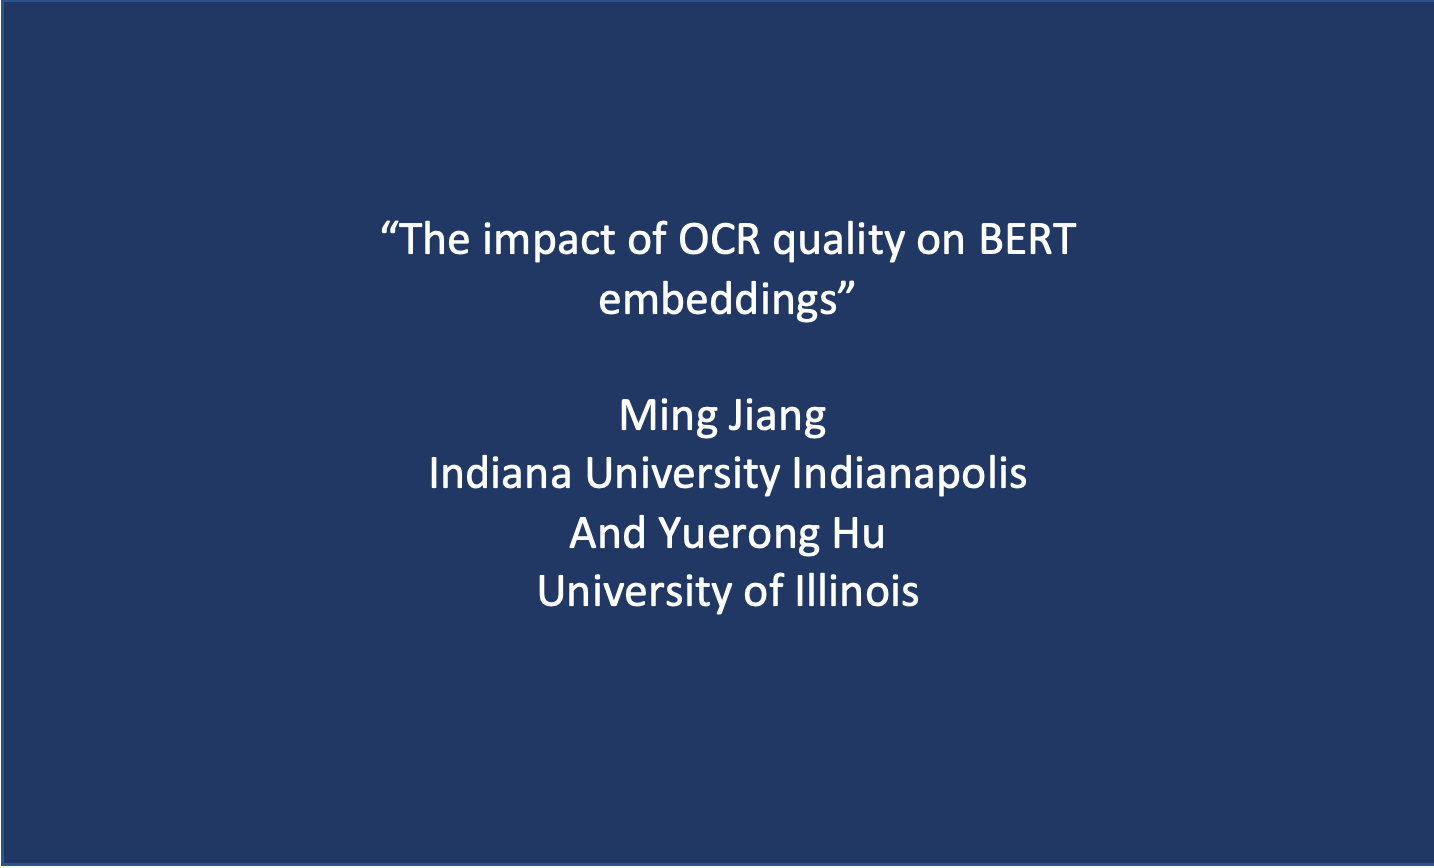 Workshop 5: Ming Jiang and Yuerong Hu, ‘The impact of OCR quality on BERT embeddings’